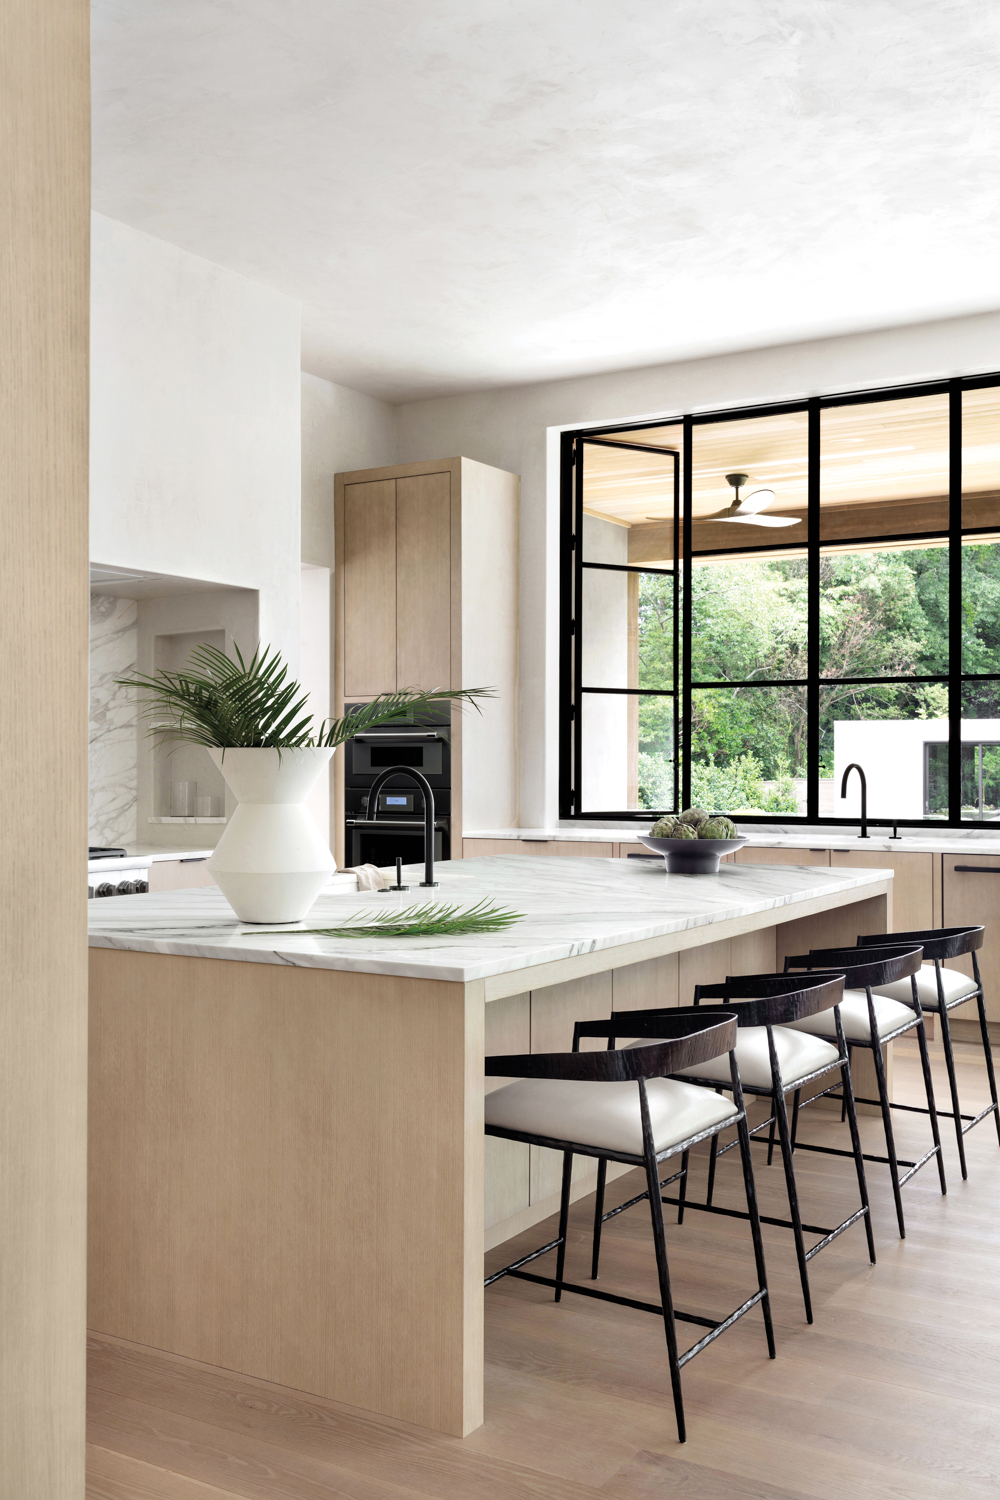 Minimalist kitchen with white oak cabinetry, plaster-coated vent wood and hinged steel windows